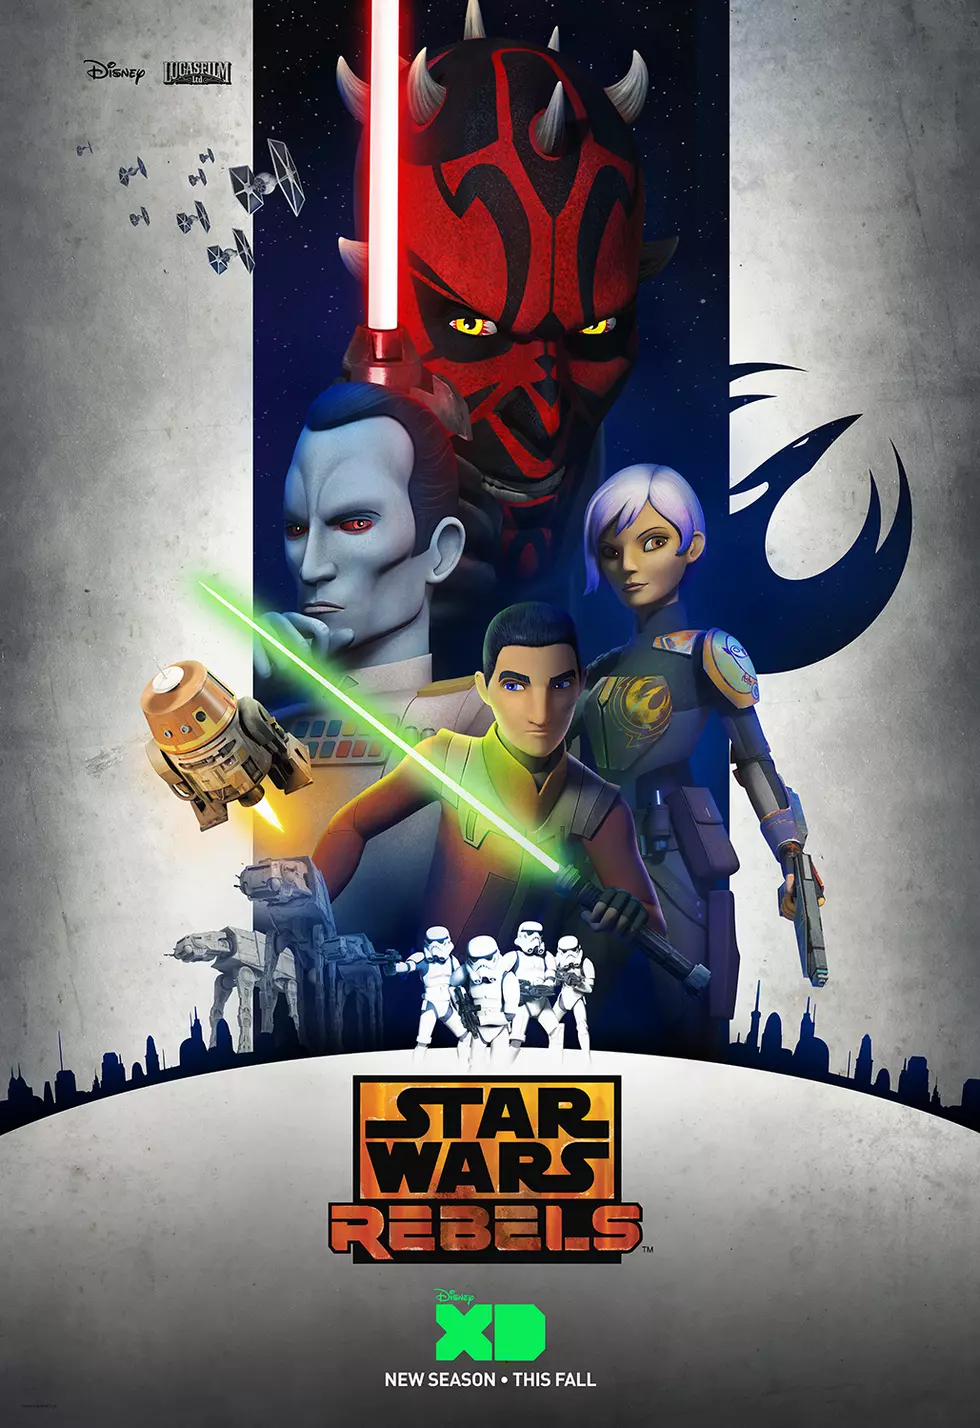 The Stakes are Higher, The Force is Stronger, and Thrawn is Back in Star Wars Rebels, Season 3